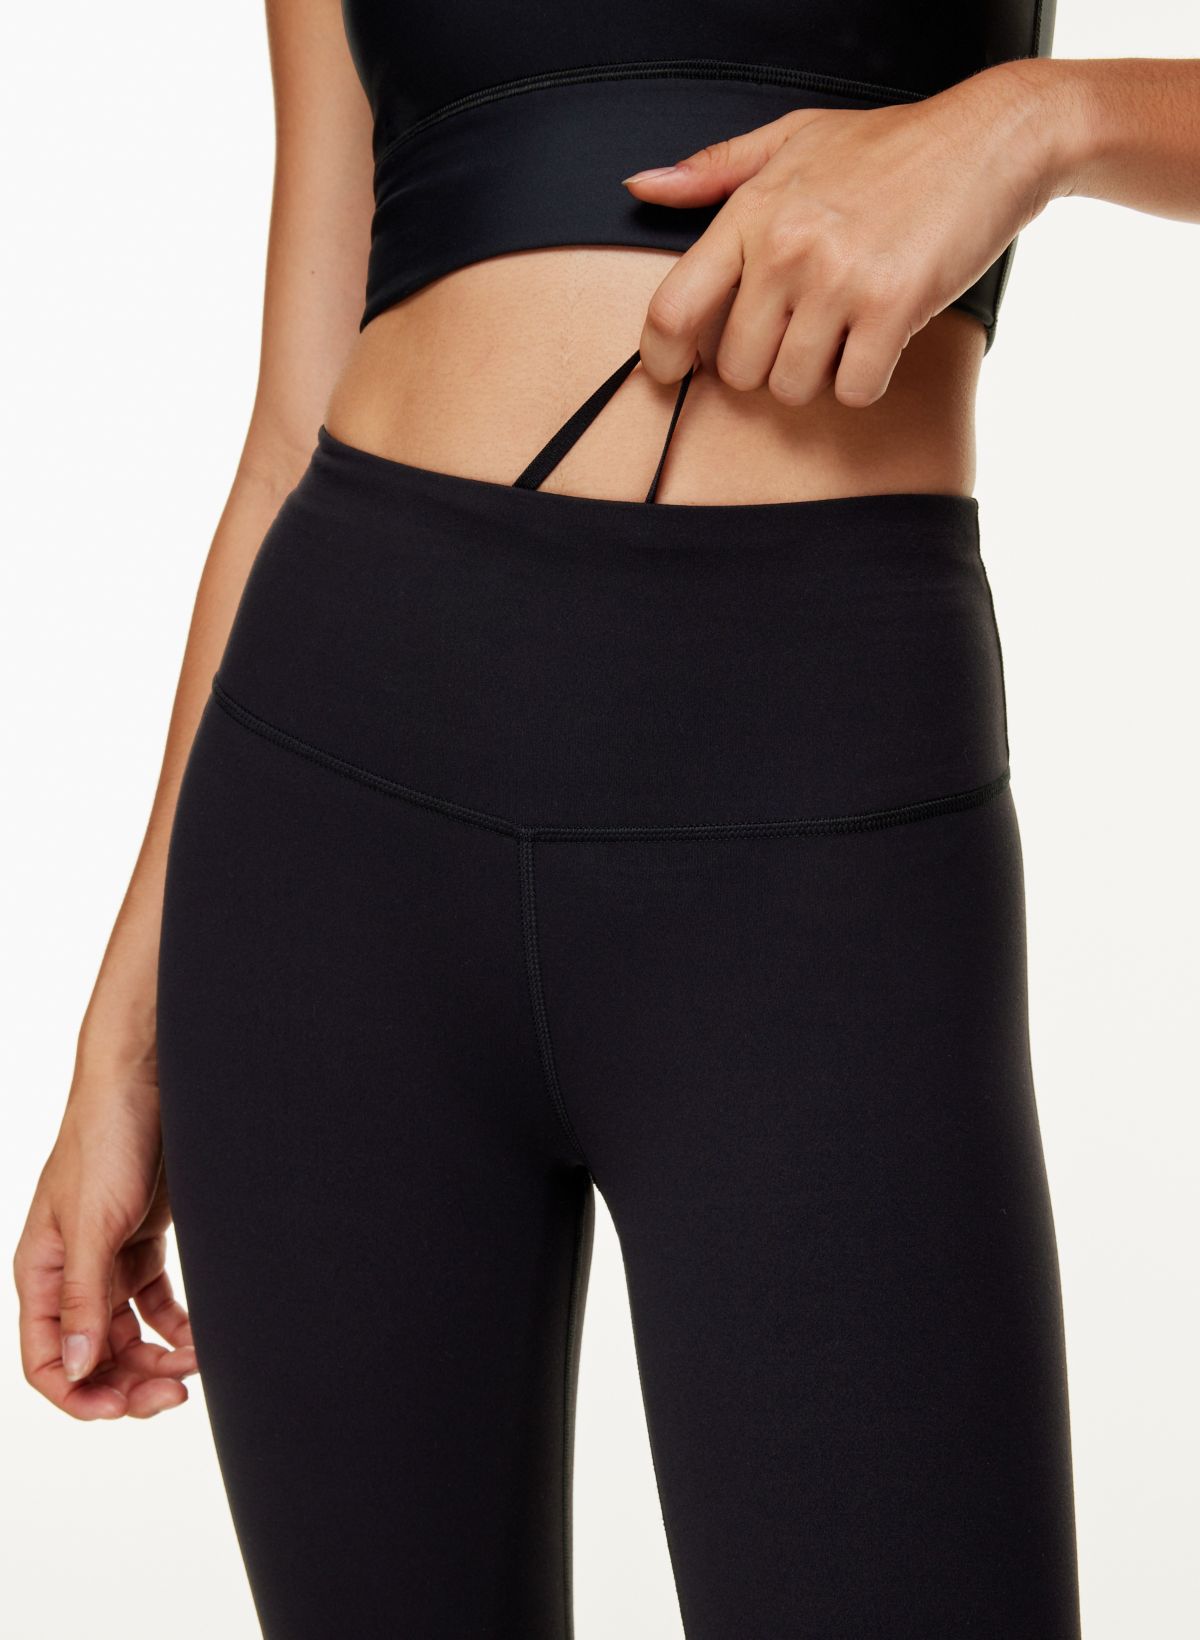 Lululemon Wunder Under Hi-Rise 7/8 Tight (25) - Wee Are From